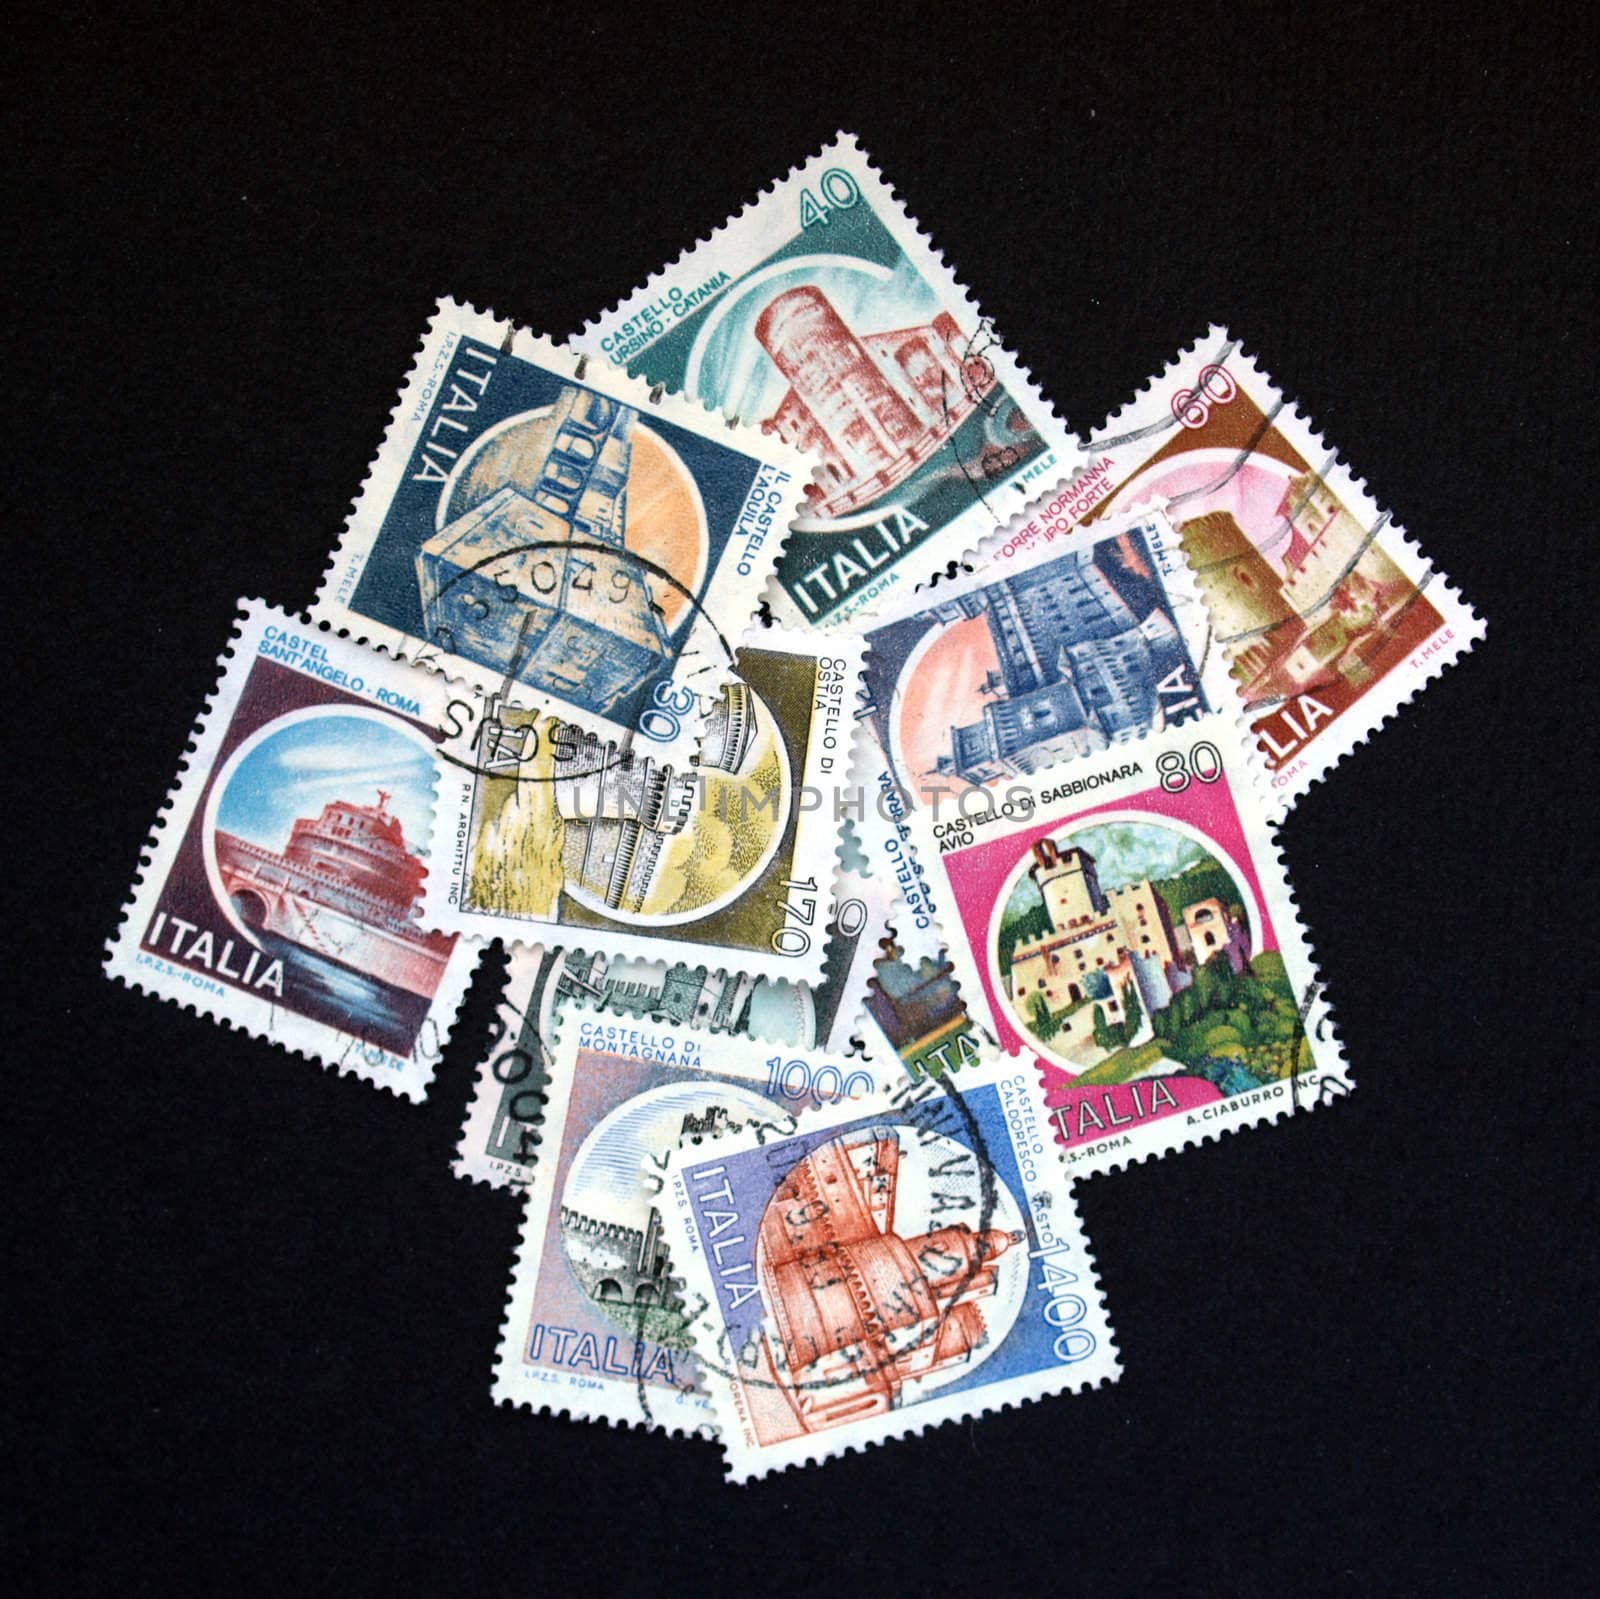 Italian stamp with ancient castles from Italy